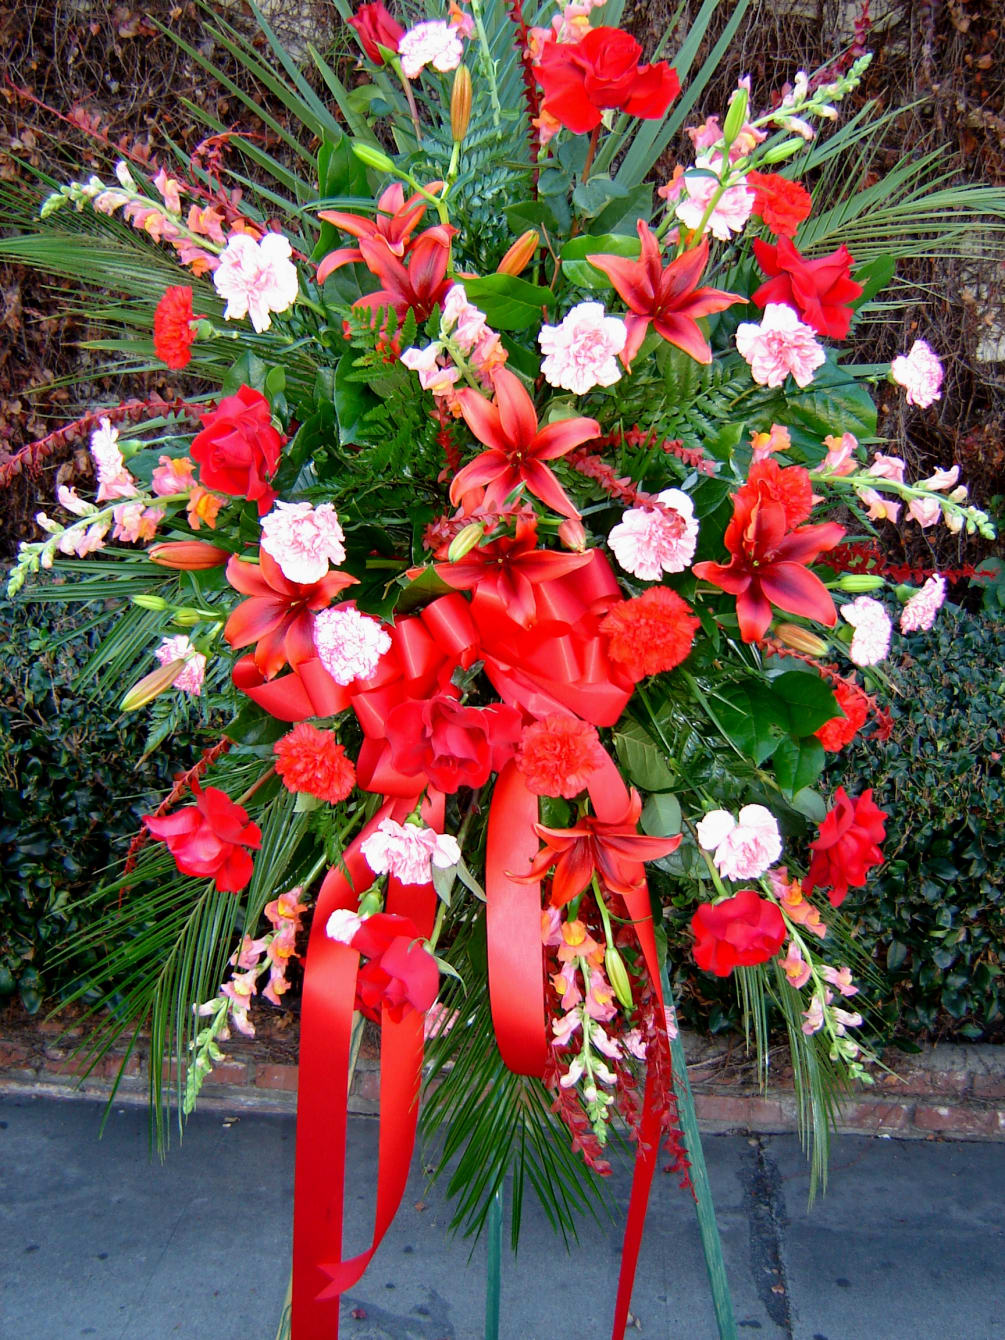 A funeral easel arrangement that gives quite a punch of red with